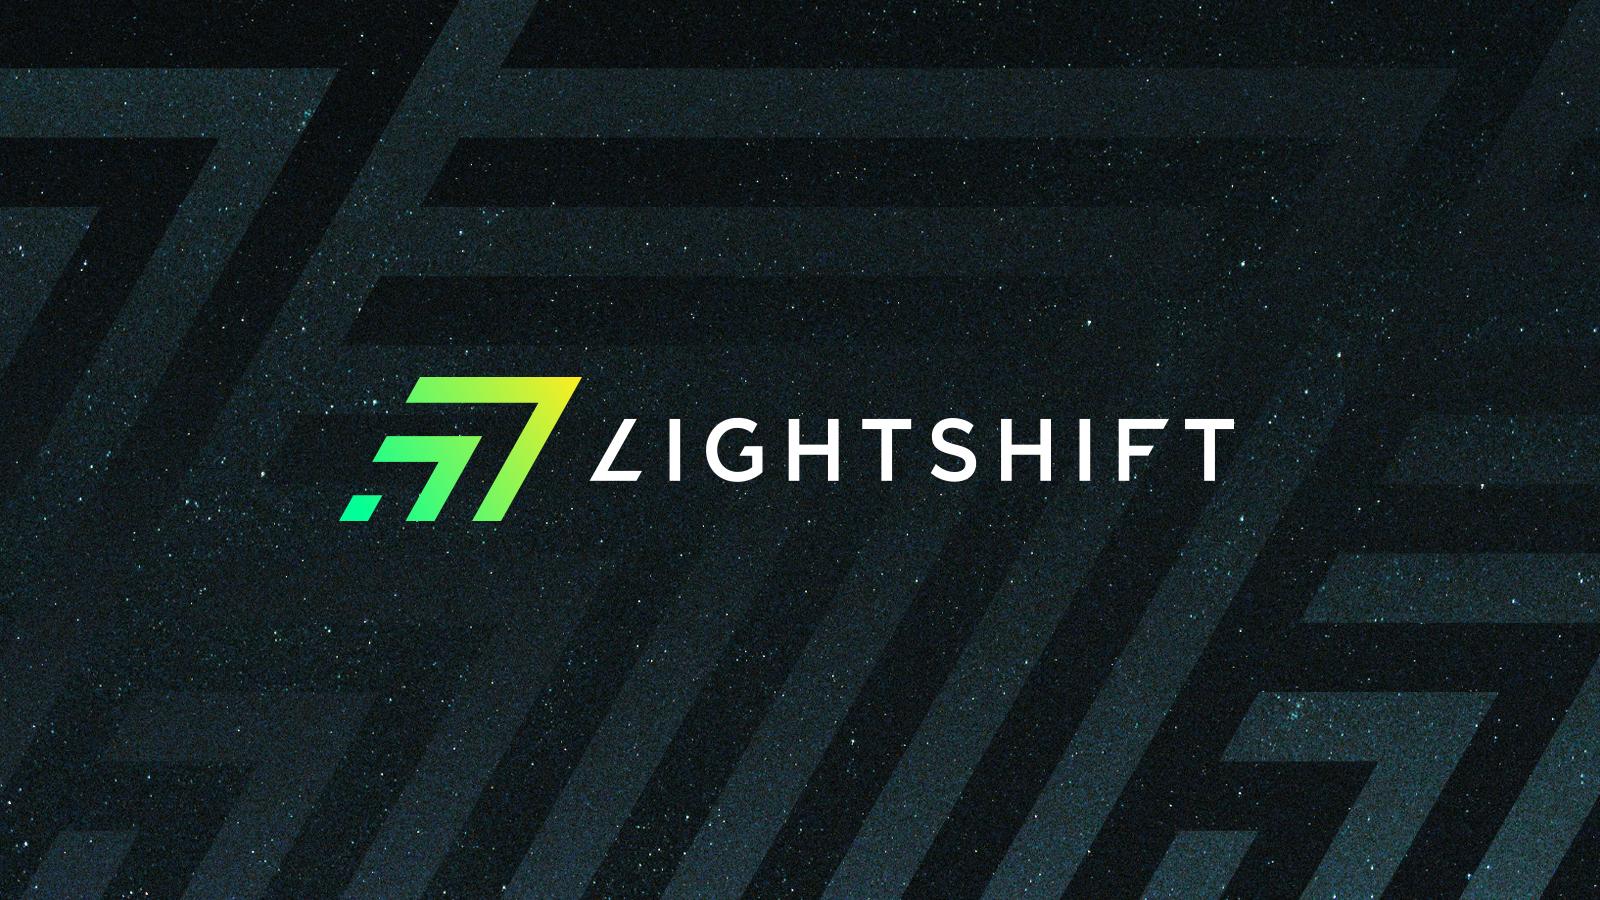 Making the shift by lighting the way header image